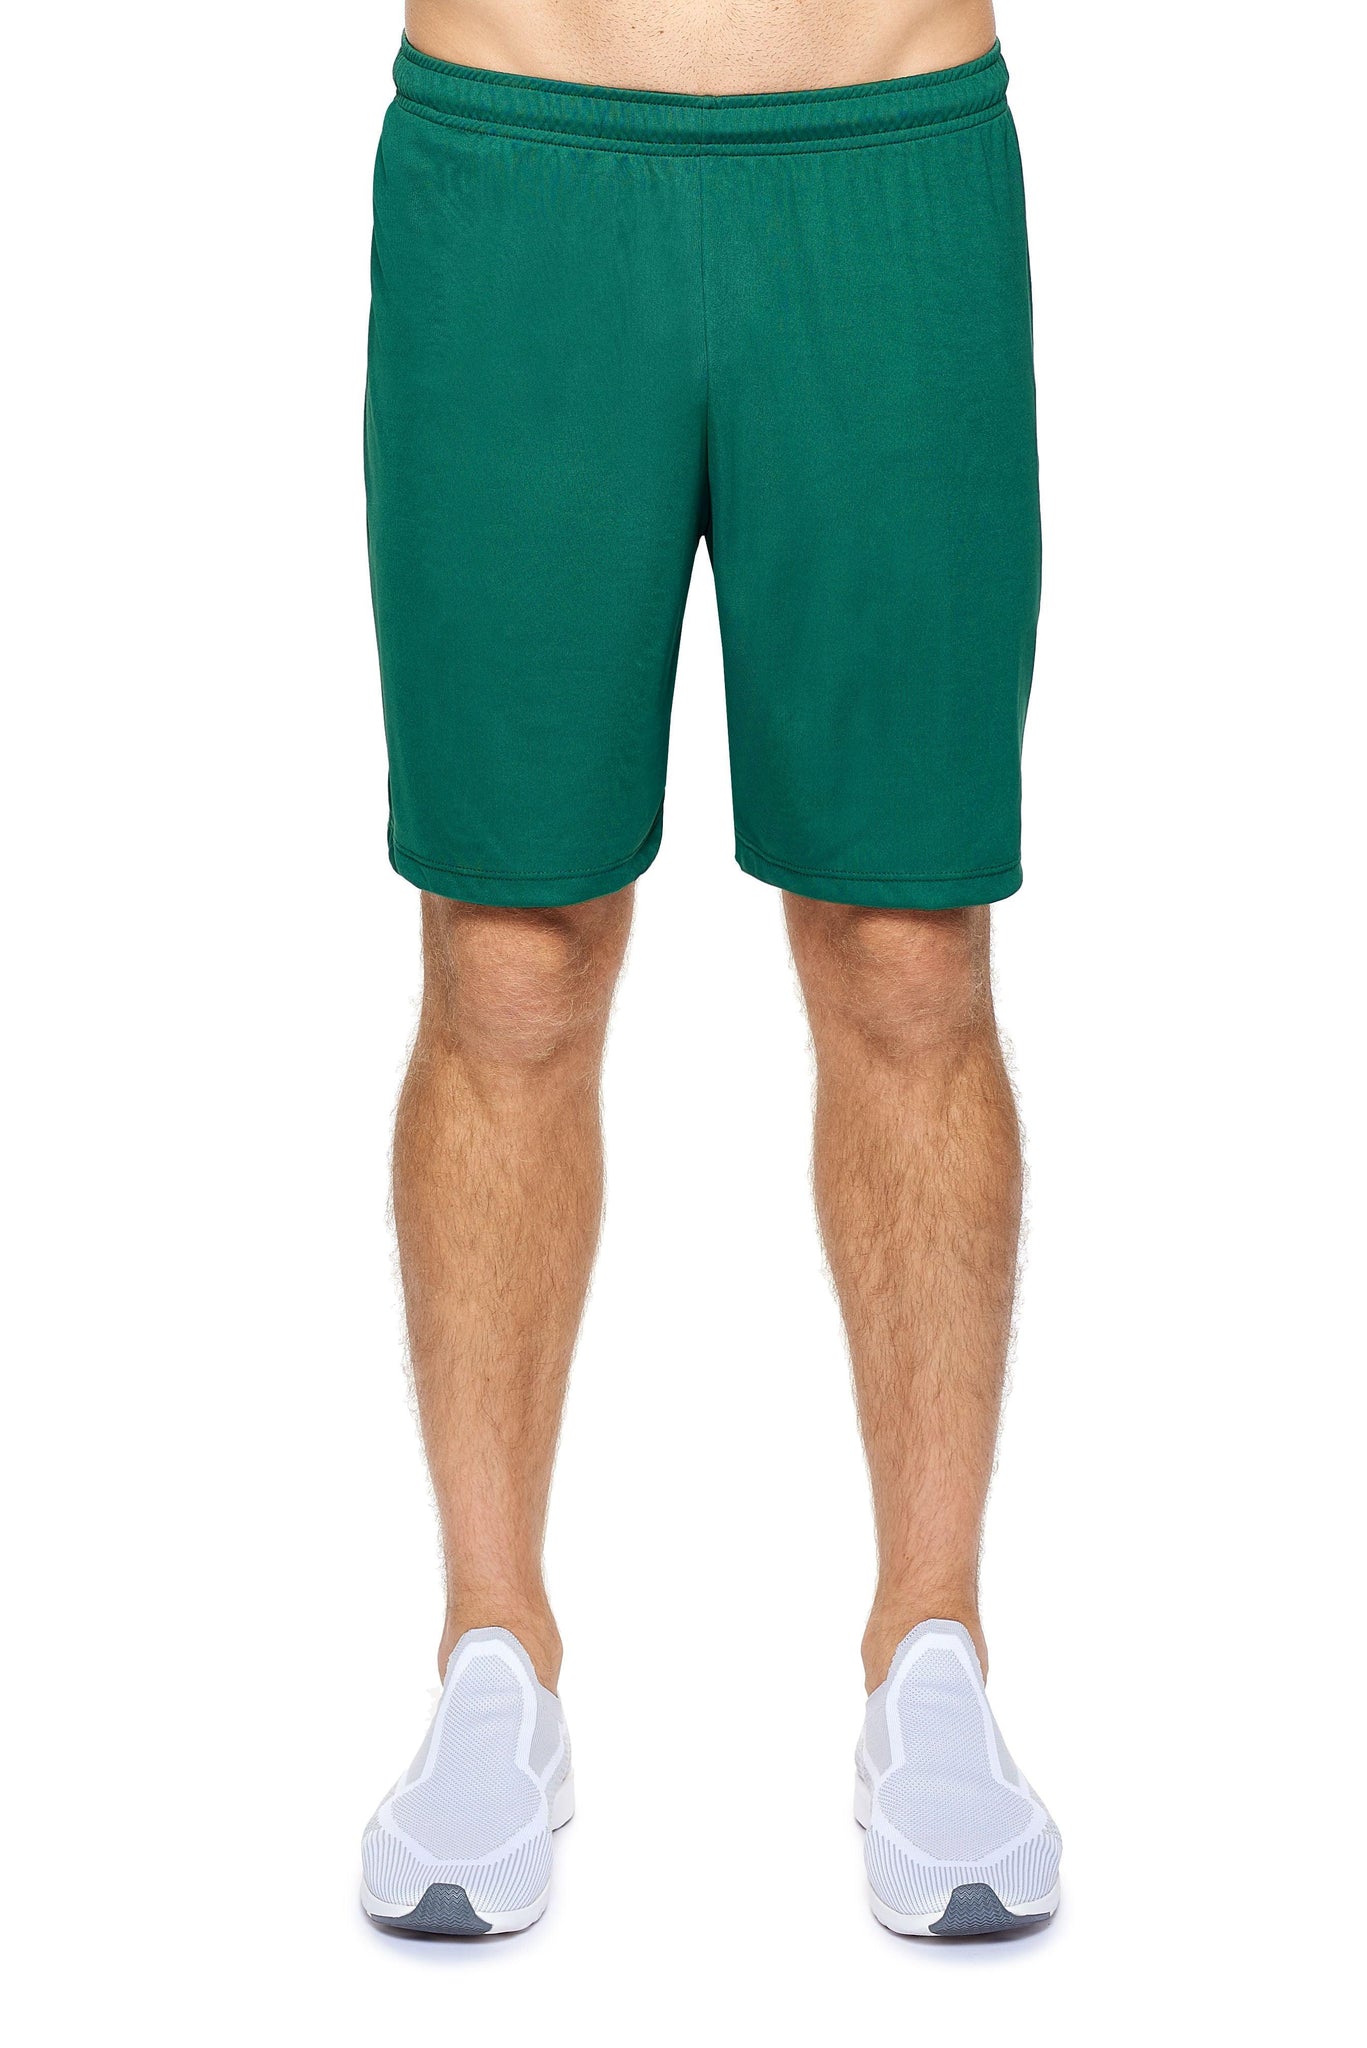 AI1091🇺🇸 DriMax™ Impact Shorts - Expert Brand #forest